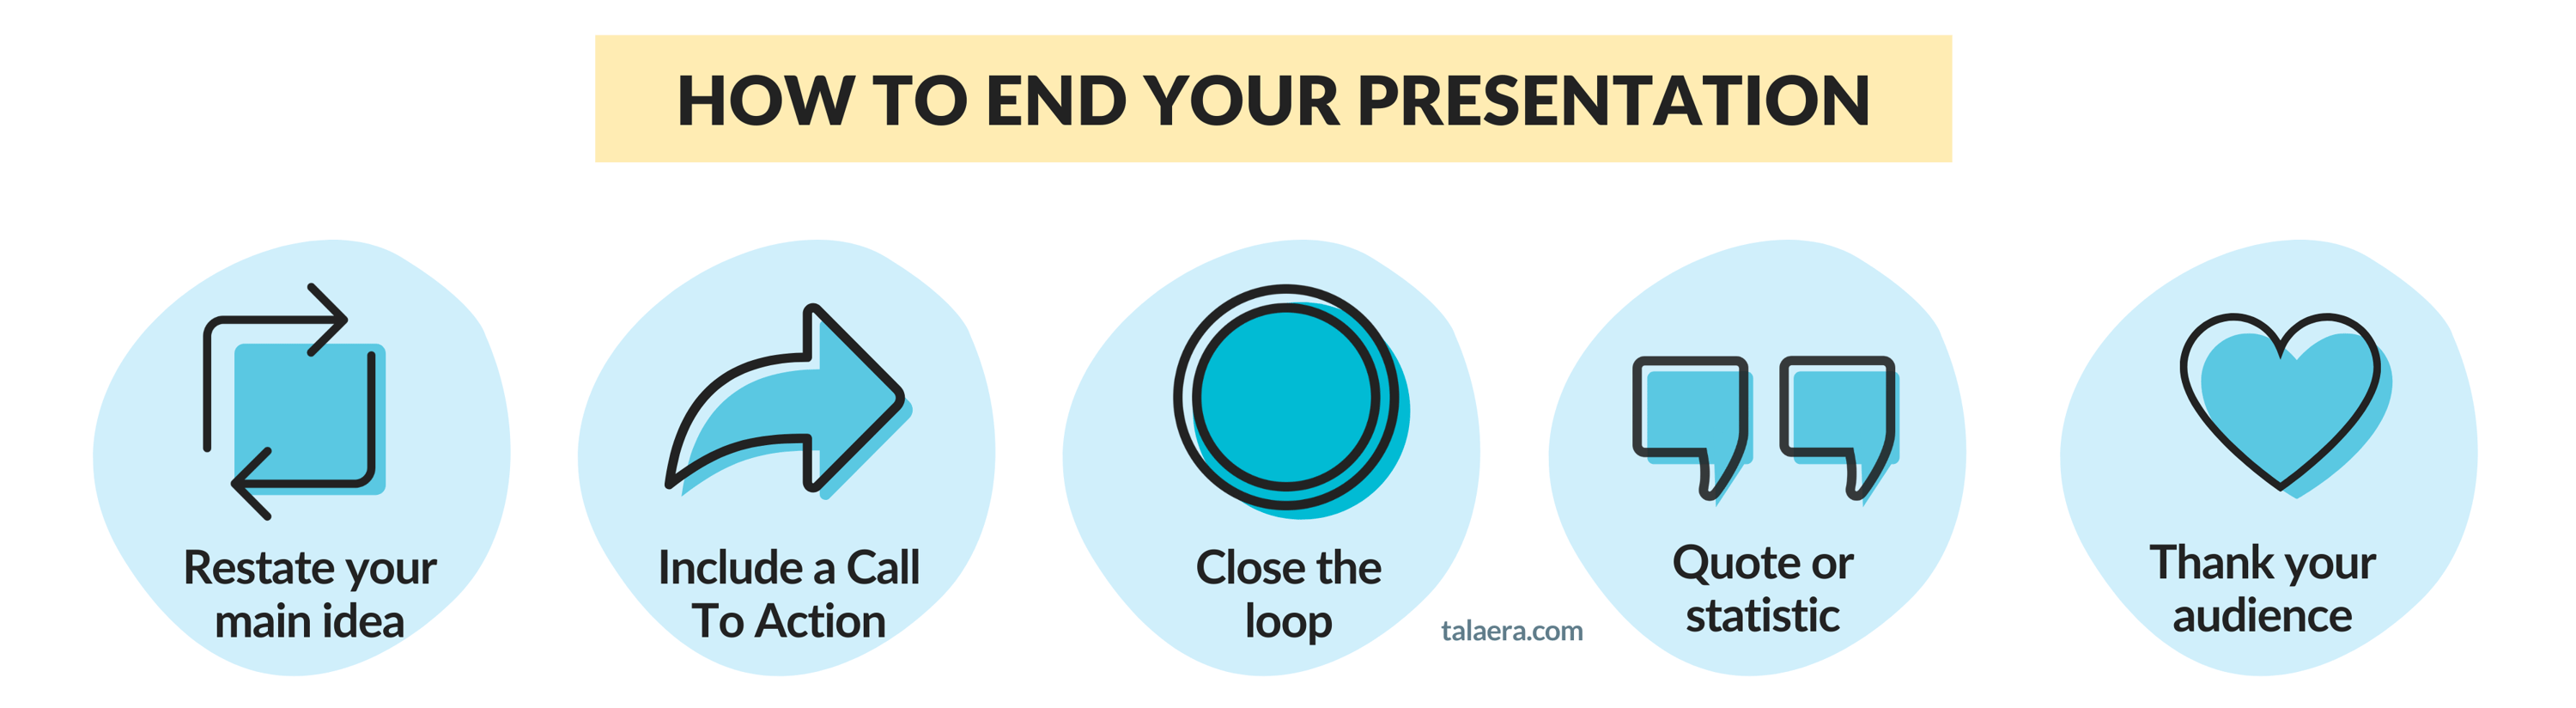 how to end a presentation well